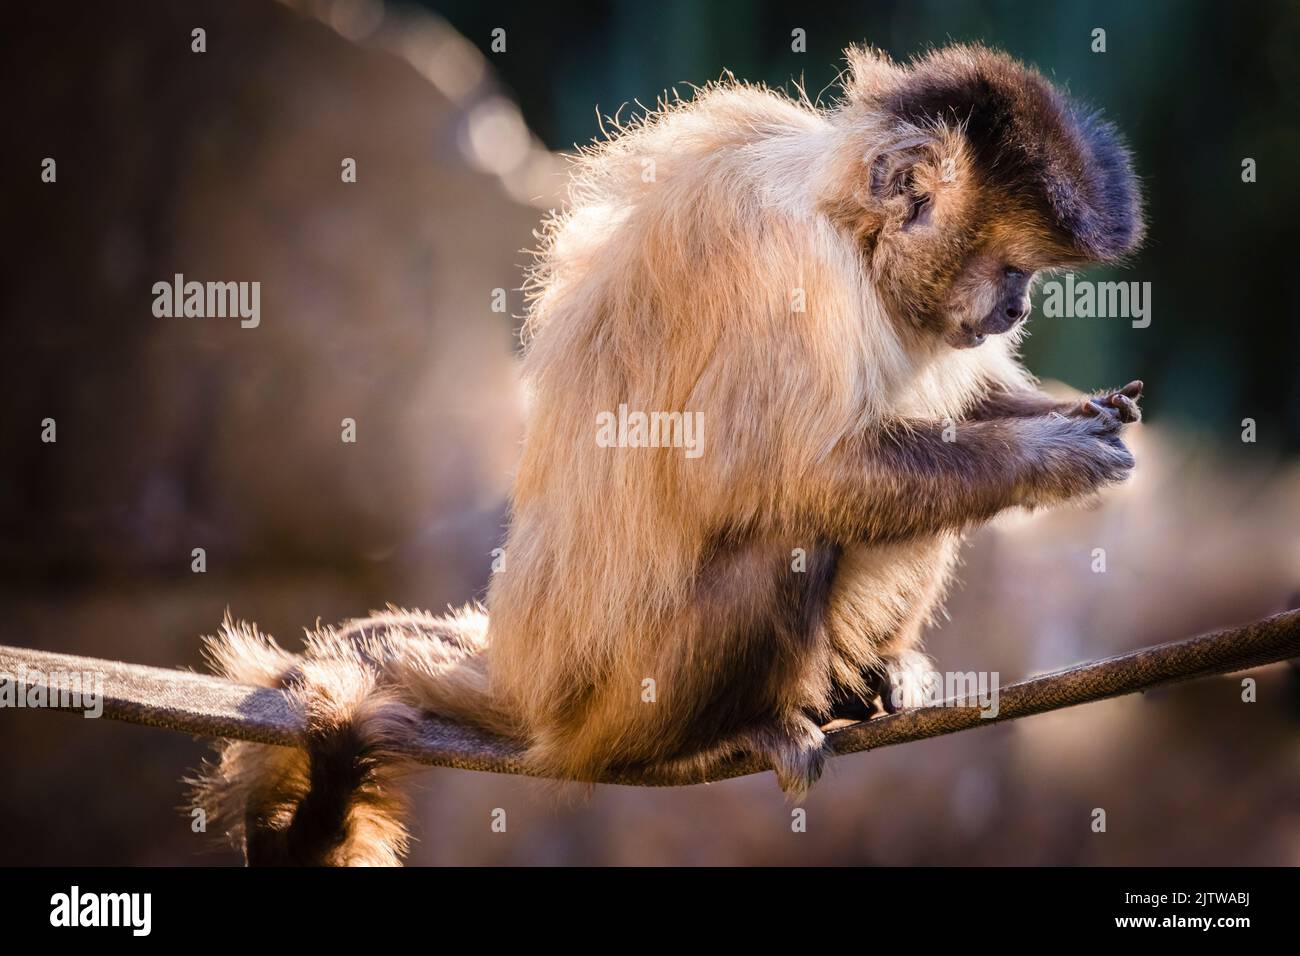 Monkey sit down looking his social midia on cell phone, Pantanal, Brazil Stock Photo